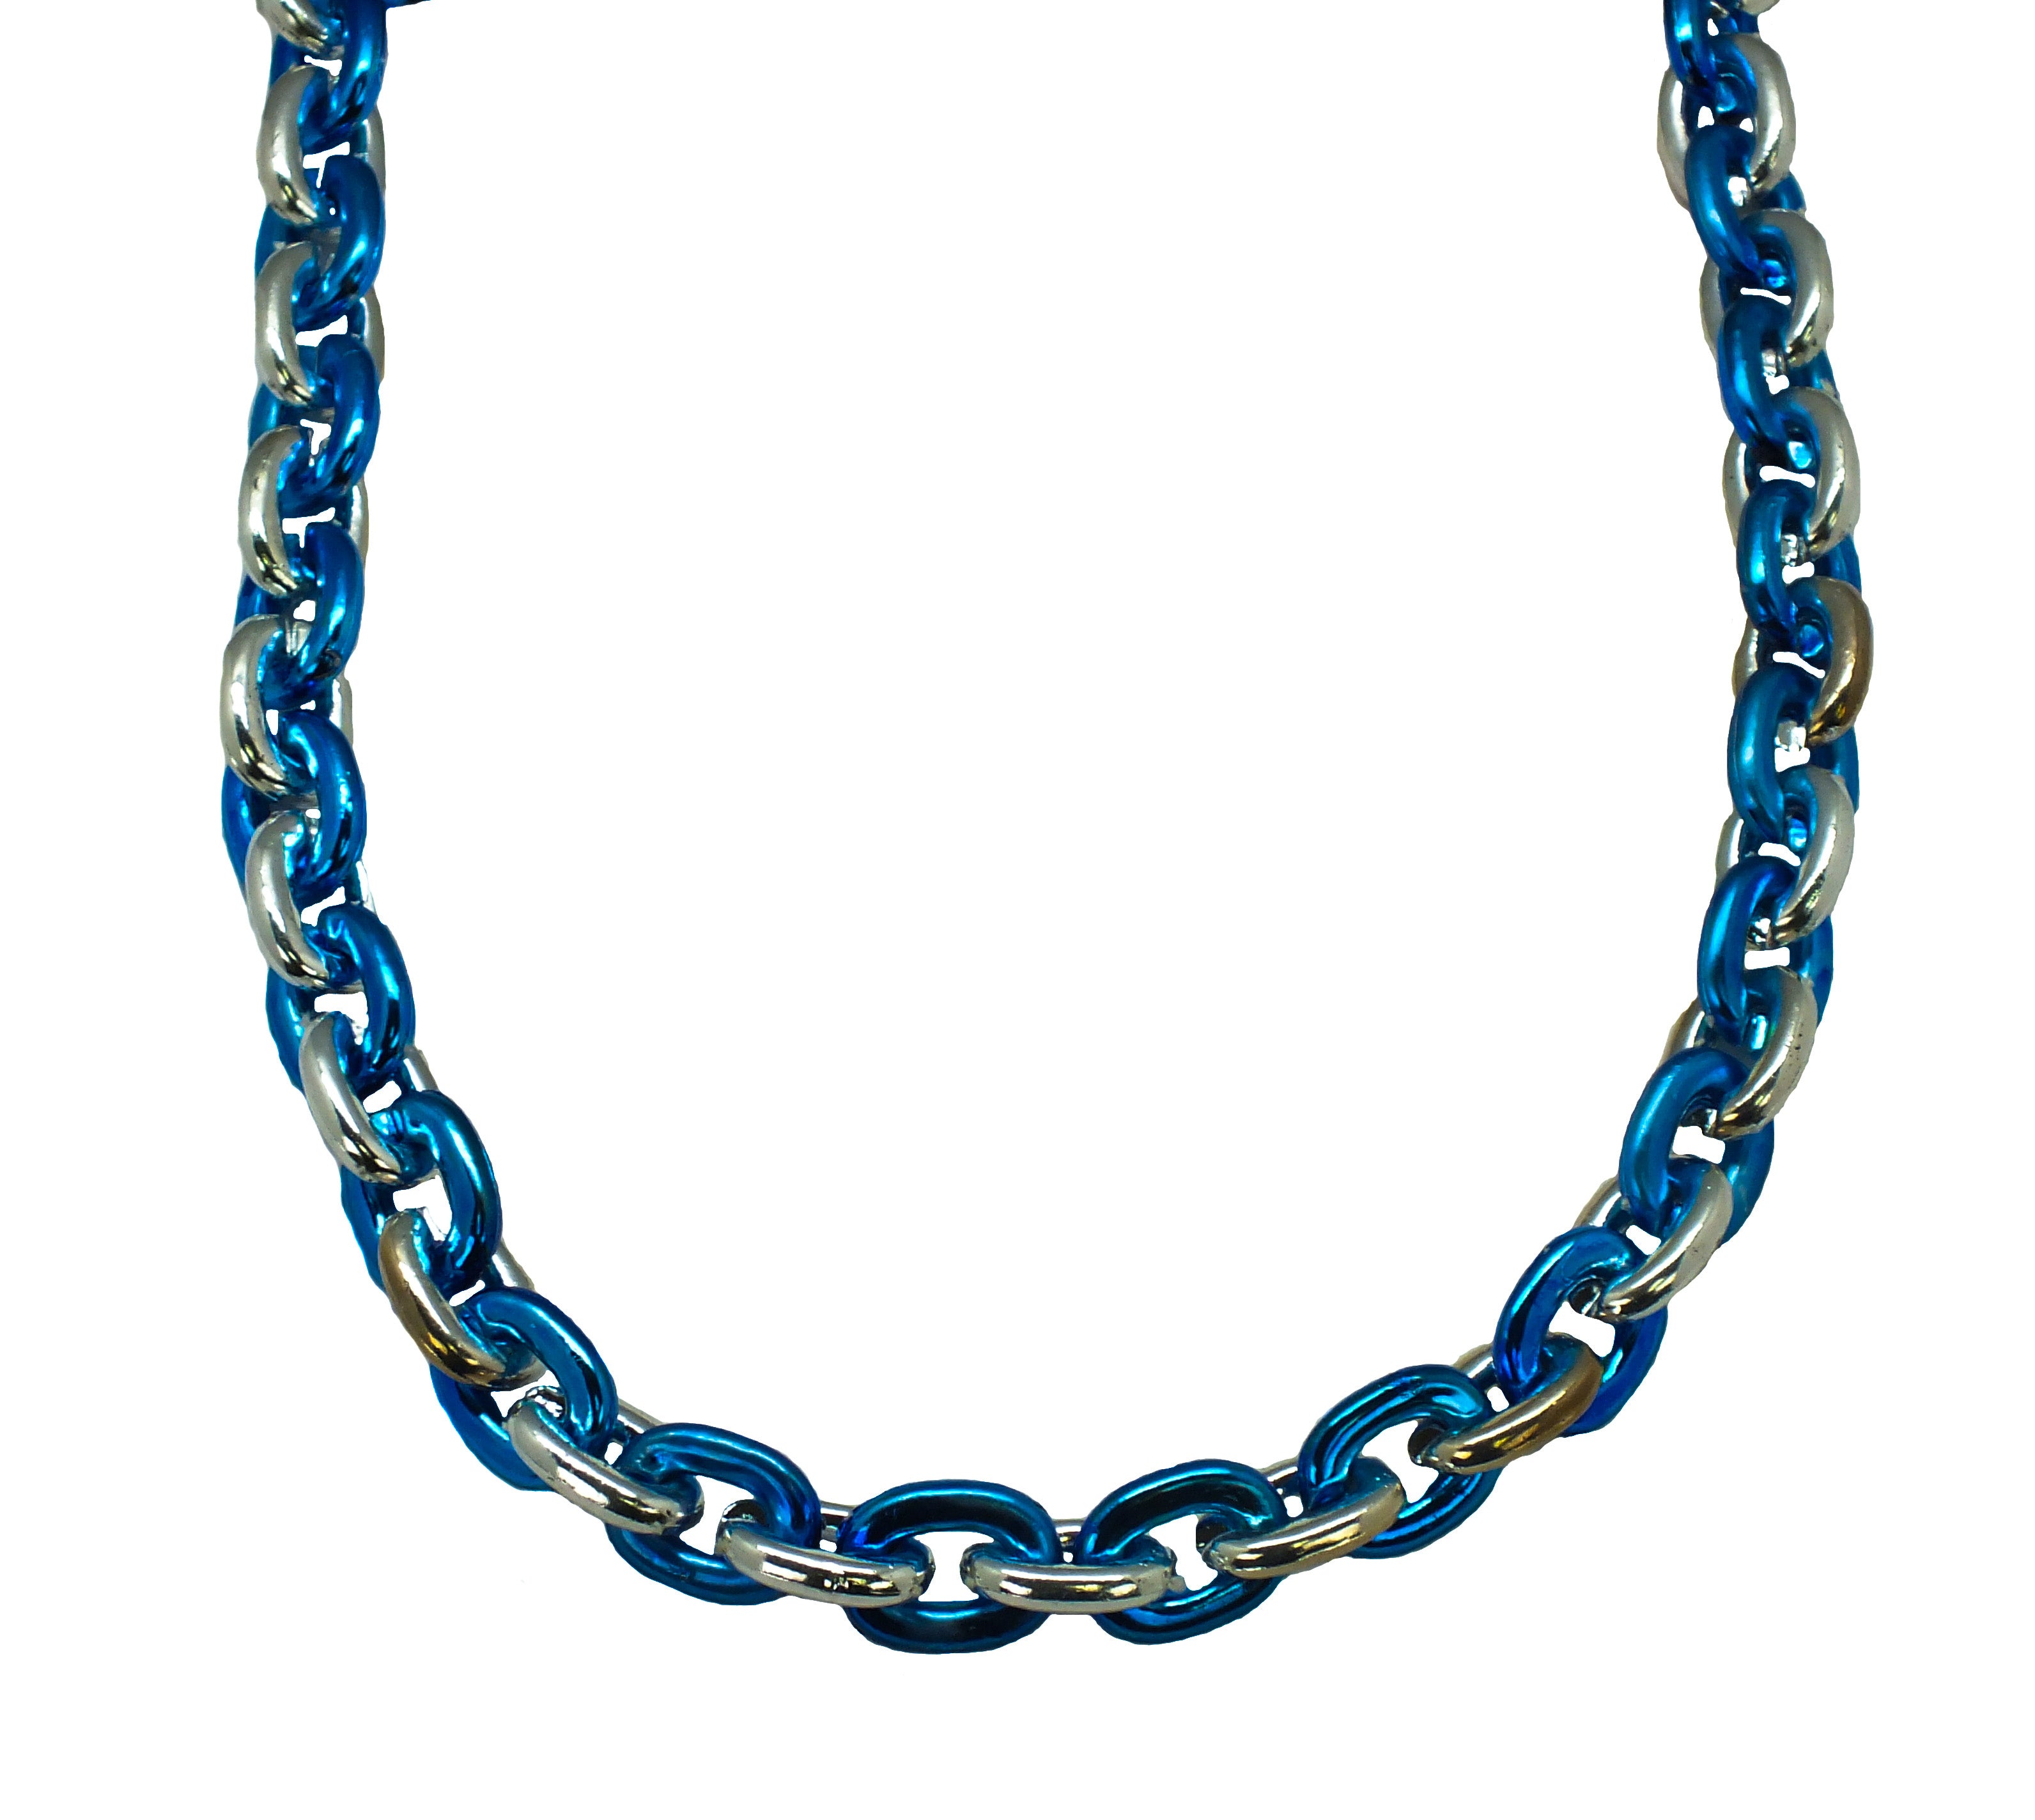 36" Two Tone BL/SL Chain Beads